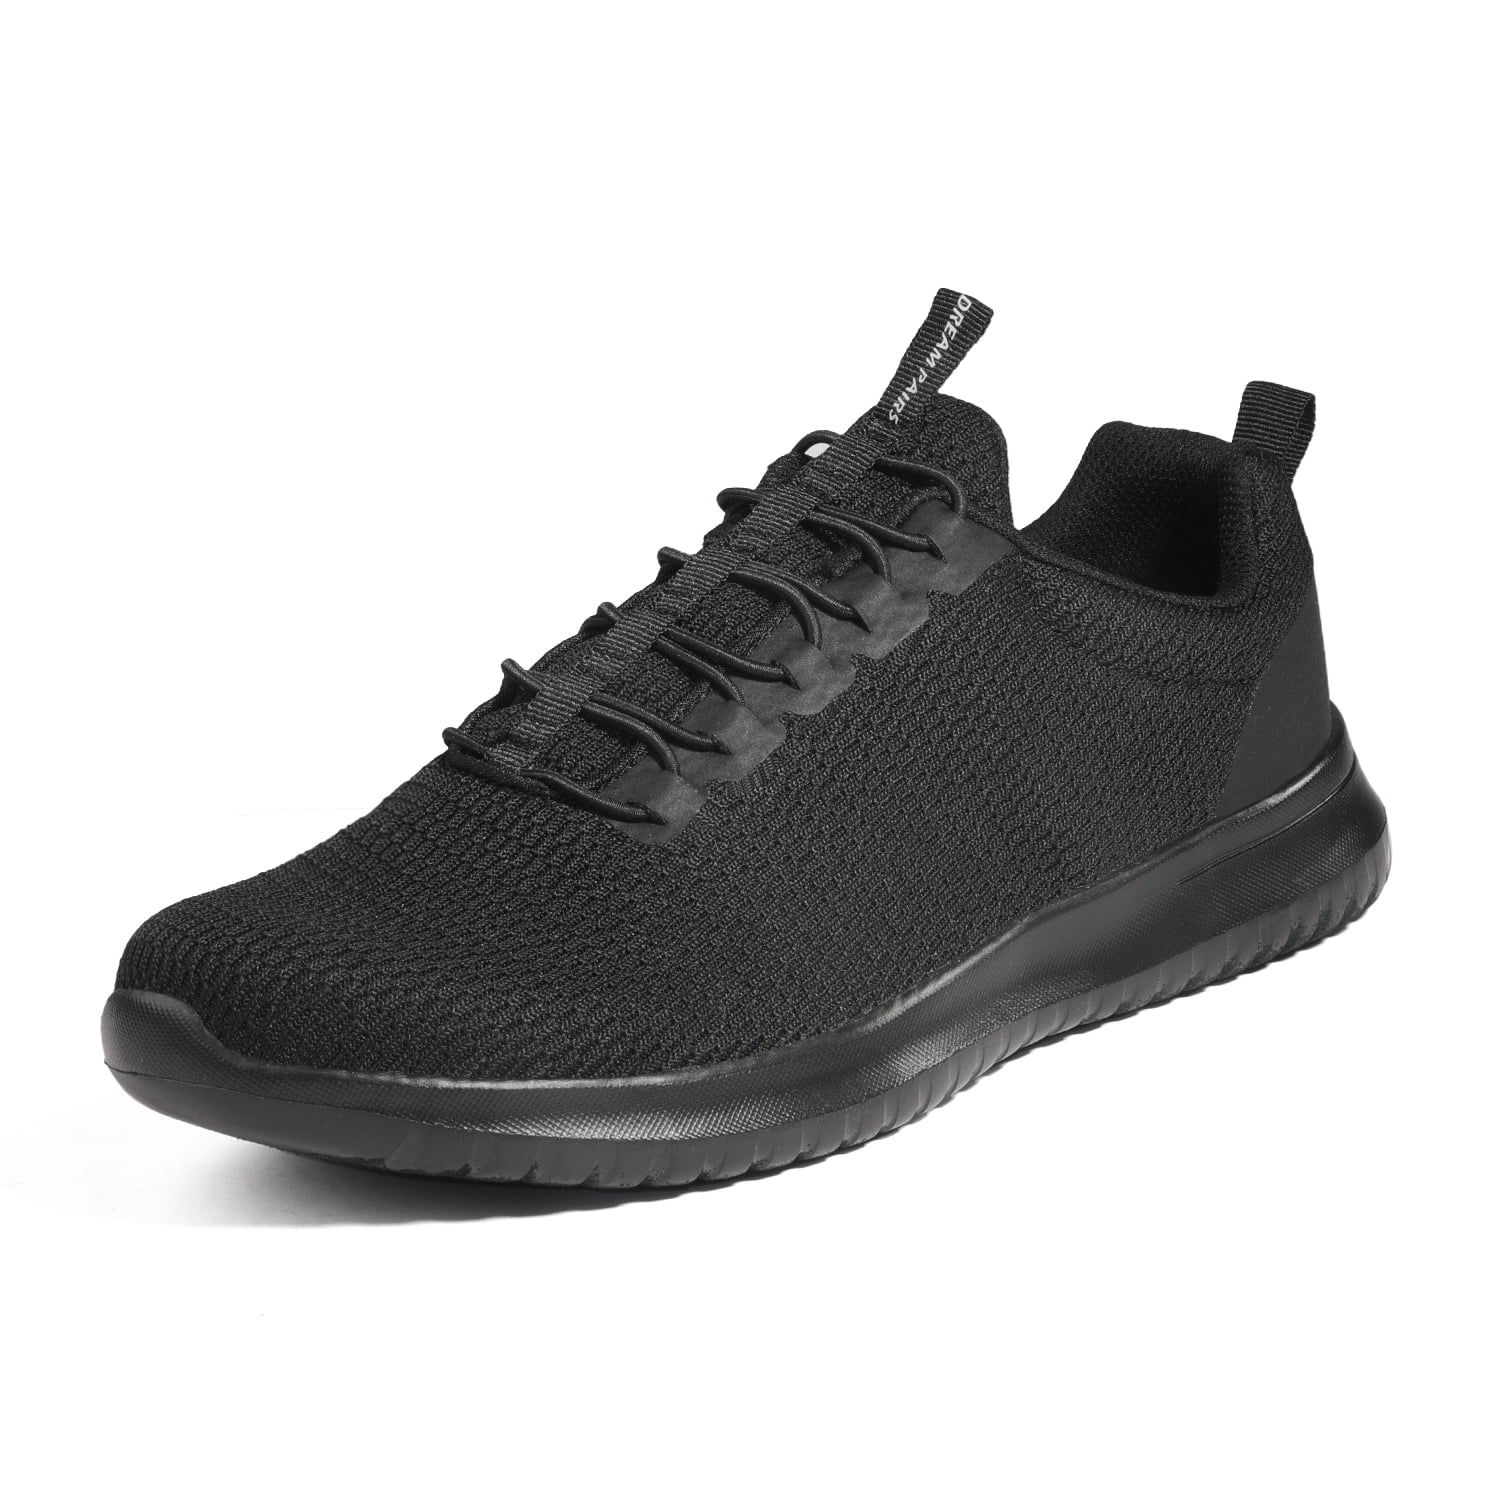 Dream Pairs - DREAM PAIRS Mesh Sneakers Sports Casual Shoes Mens ...